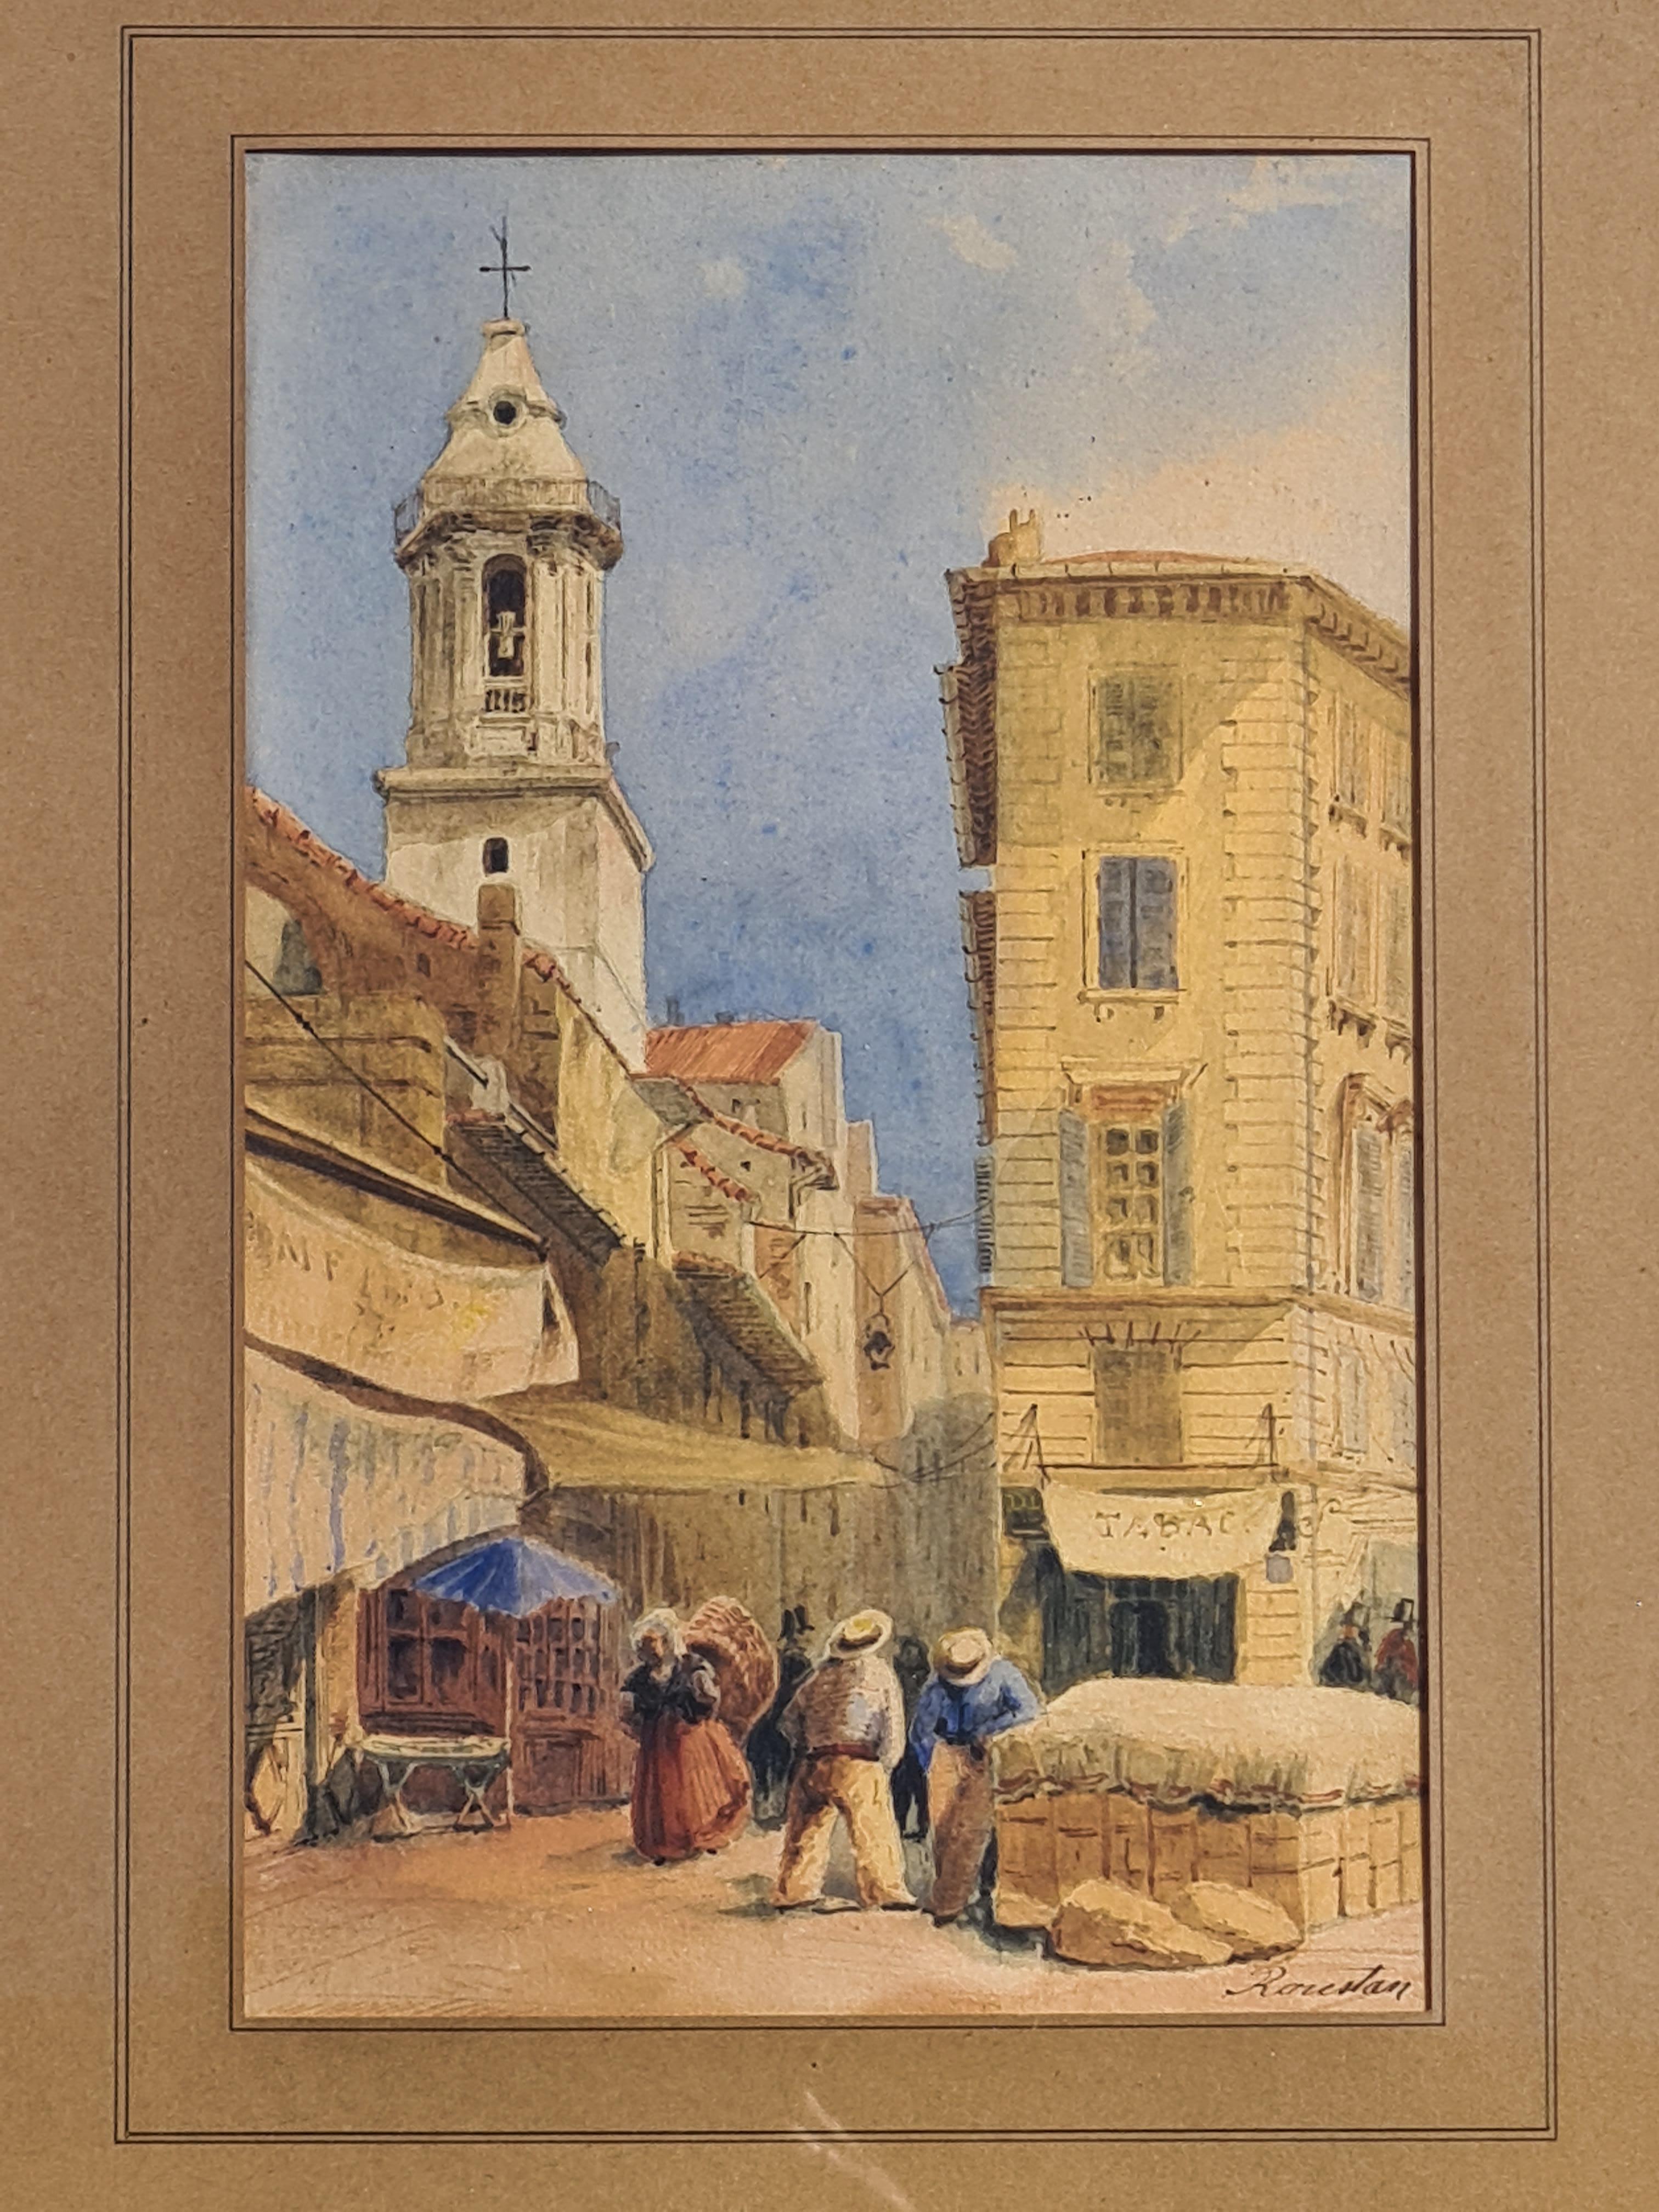 Late 19th century realist oil on paper view of Marseille and the church of St Ferreol in the South of France, attributed to French artist Lucien Marius Paul Roustan, signed Roustan bottom right. Presented in period giltwood frame with Marseille